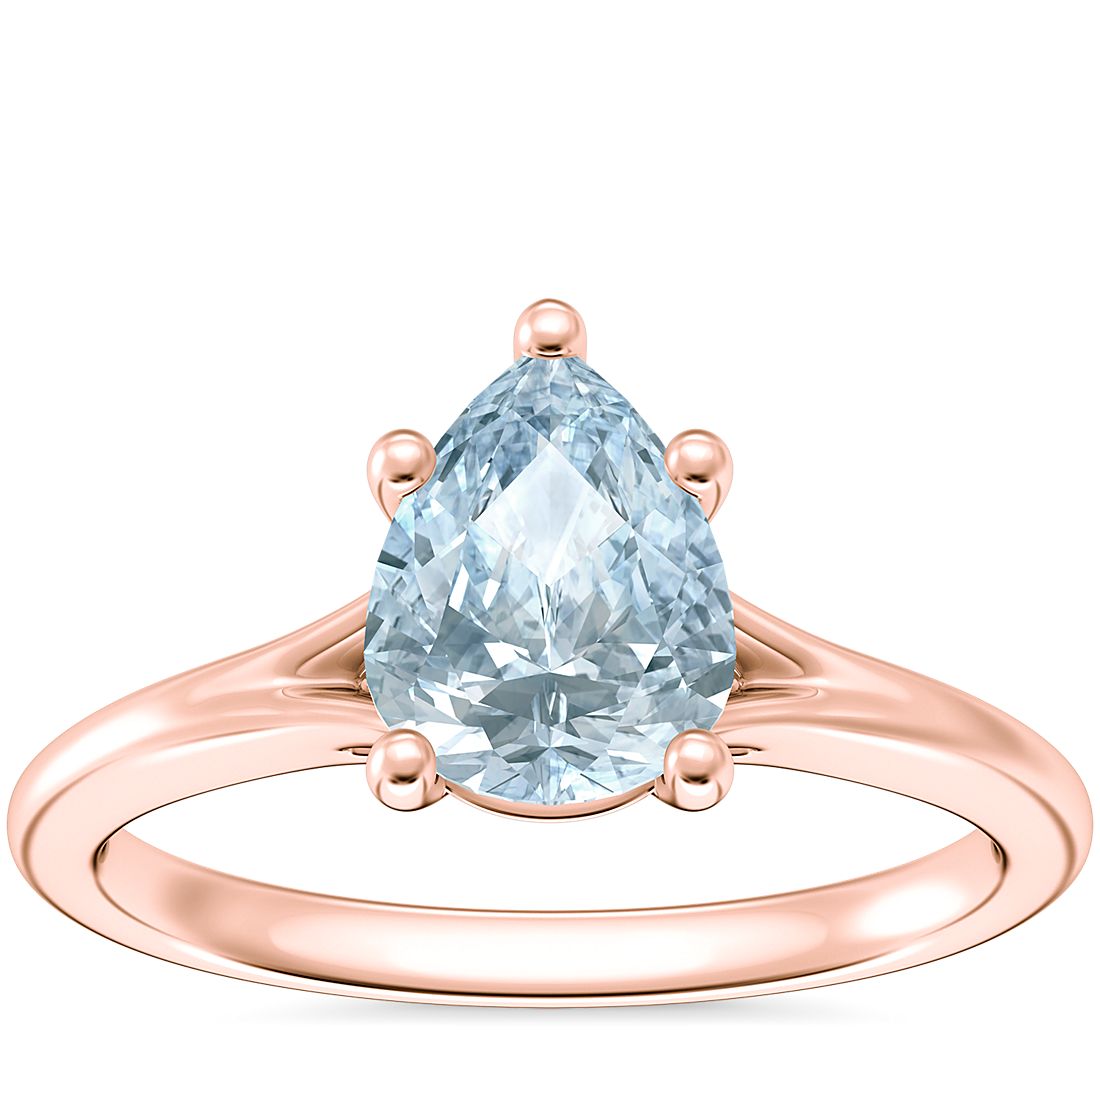 Petite Split Shank Solitaire Engagement Ring with Pear-Shaped Aquamarine in 14k Rose Gold (8x6mm)